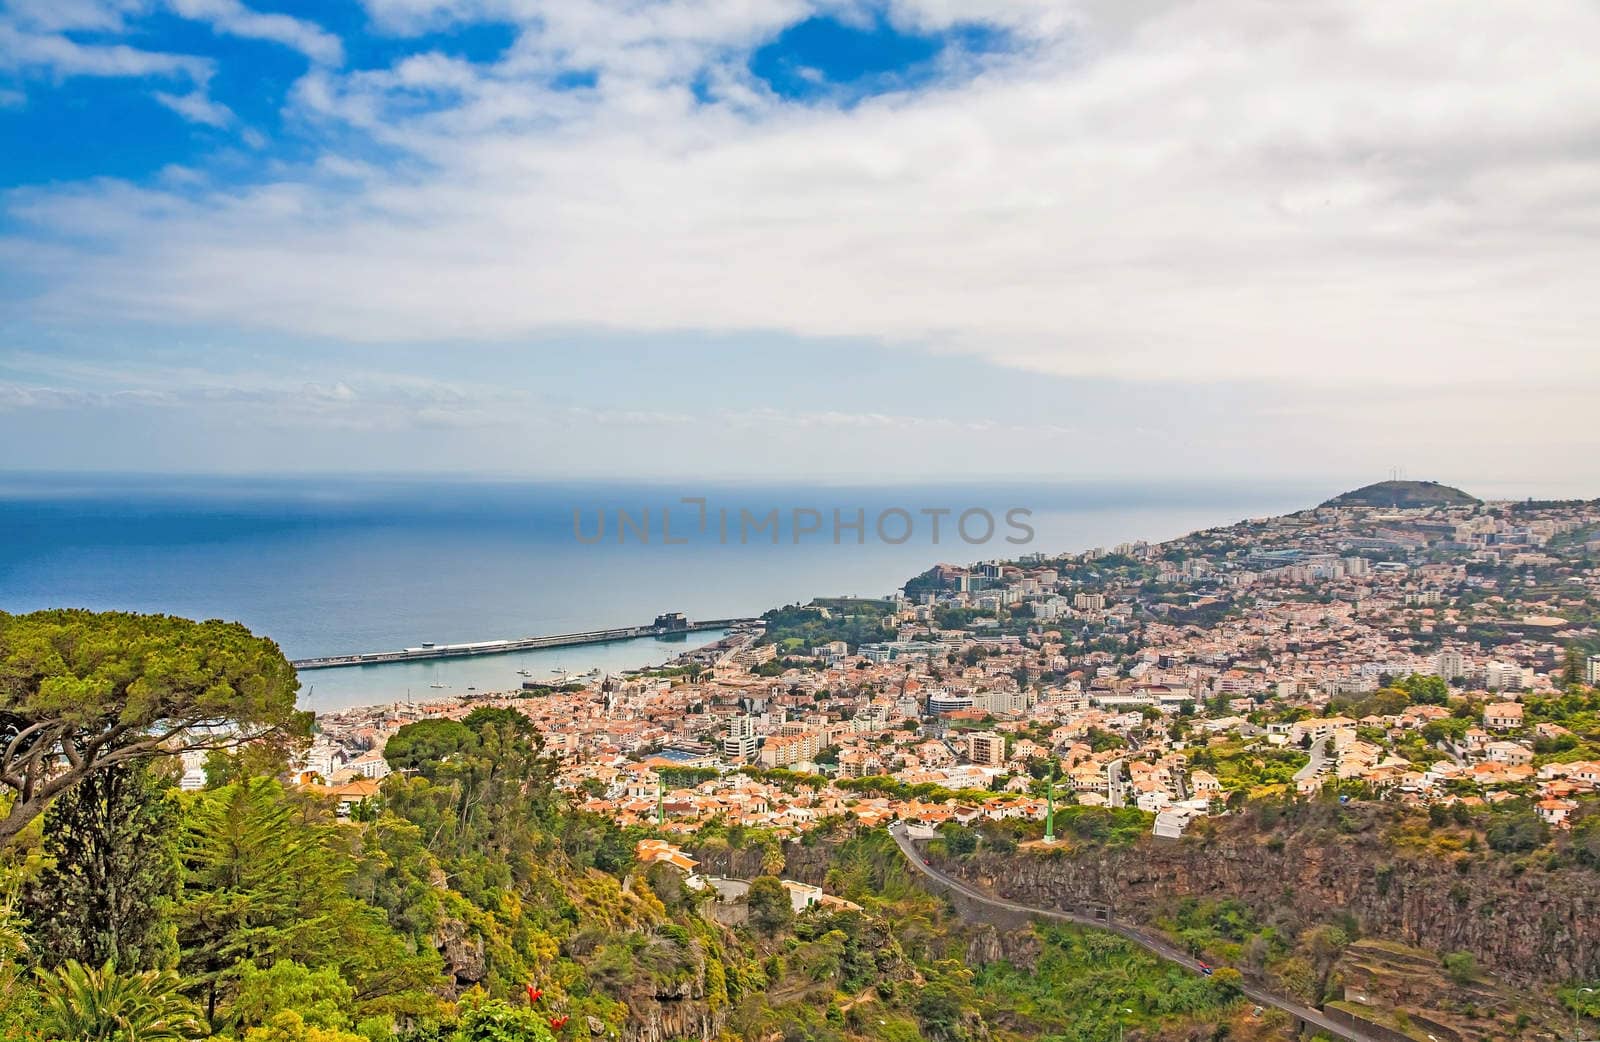 Panoramic view over Funchal, Madeira, Portugal with its harbor